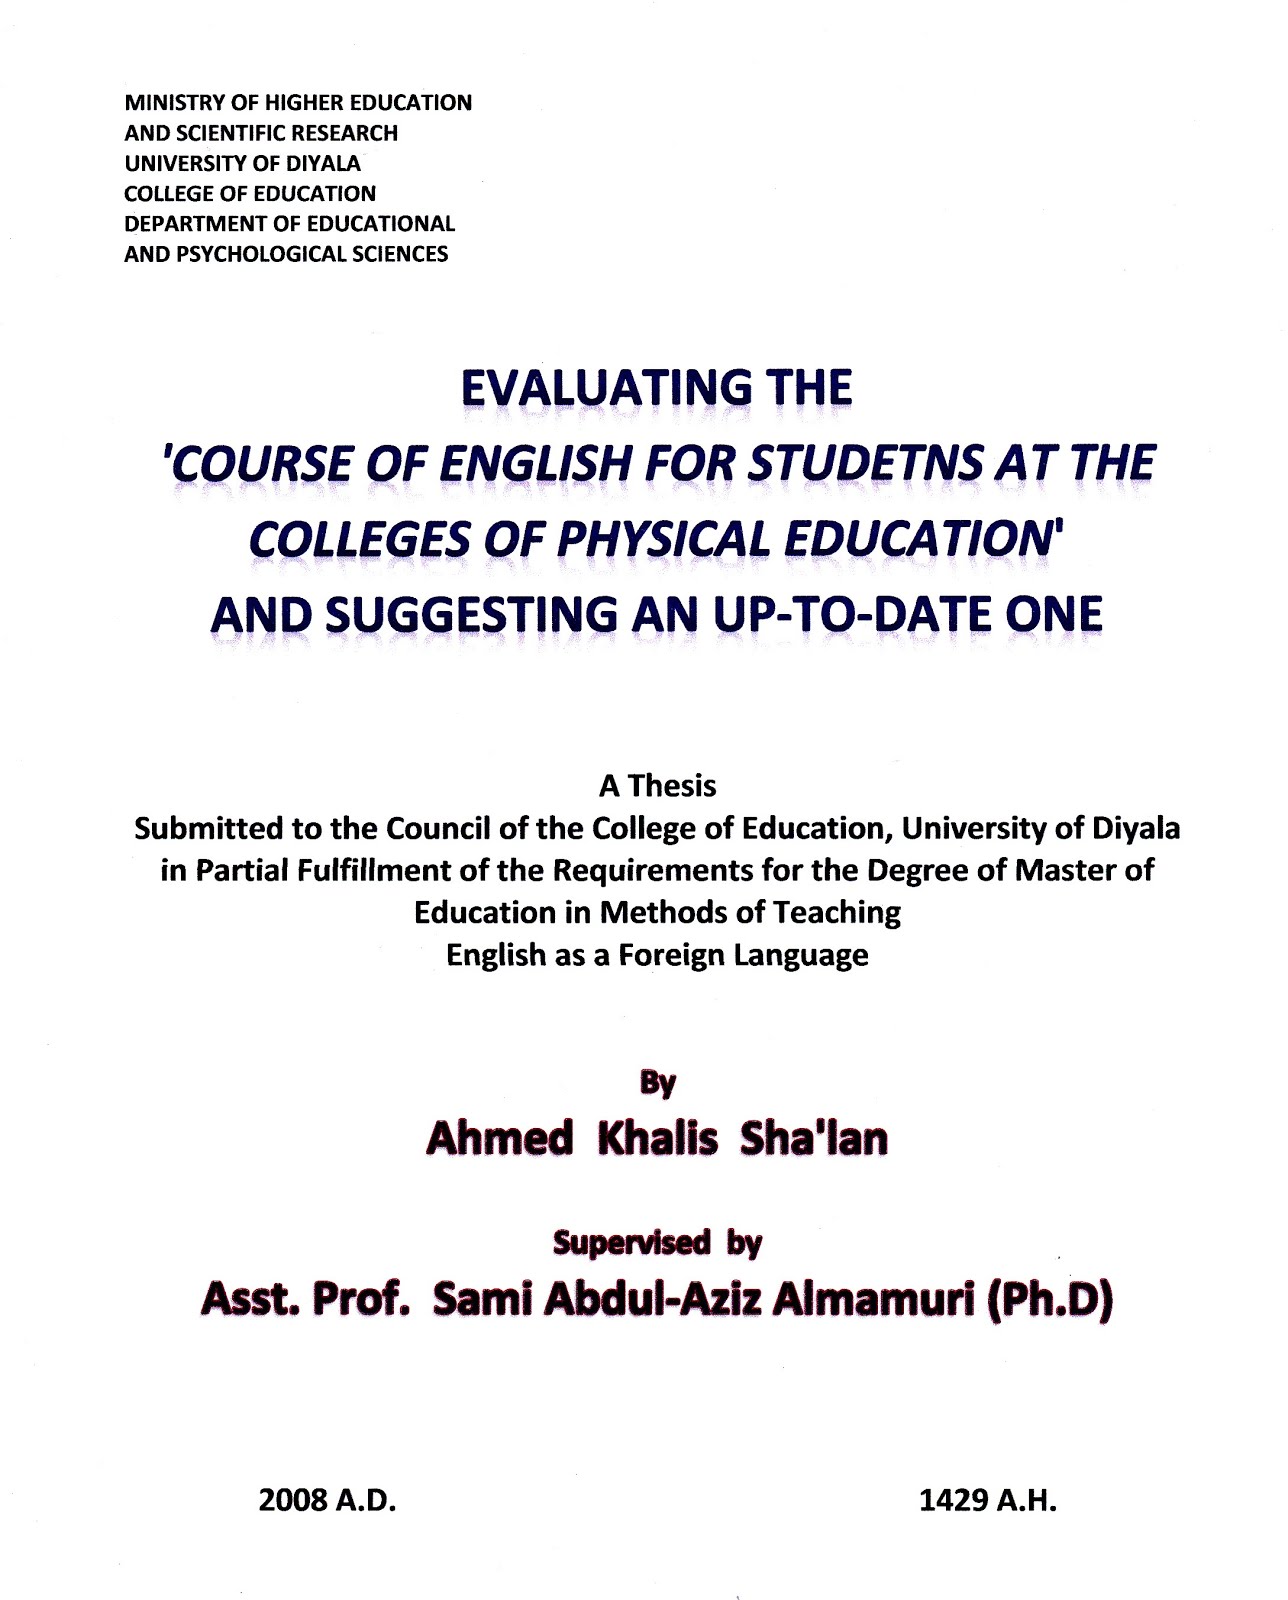 Evaluating The 'COURSE OF ENGLISH FOR STUDETNS AT THE COLLEGES OF PHYSICAL EDUCATION' And Suggestin